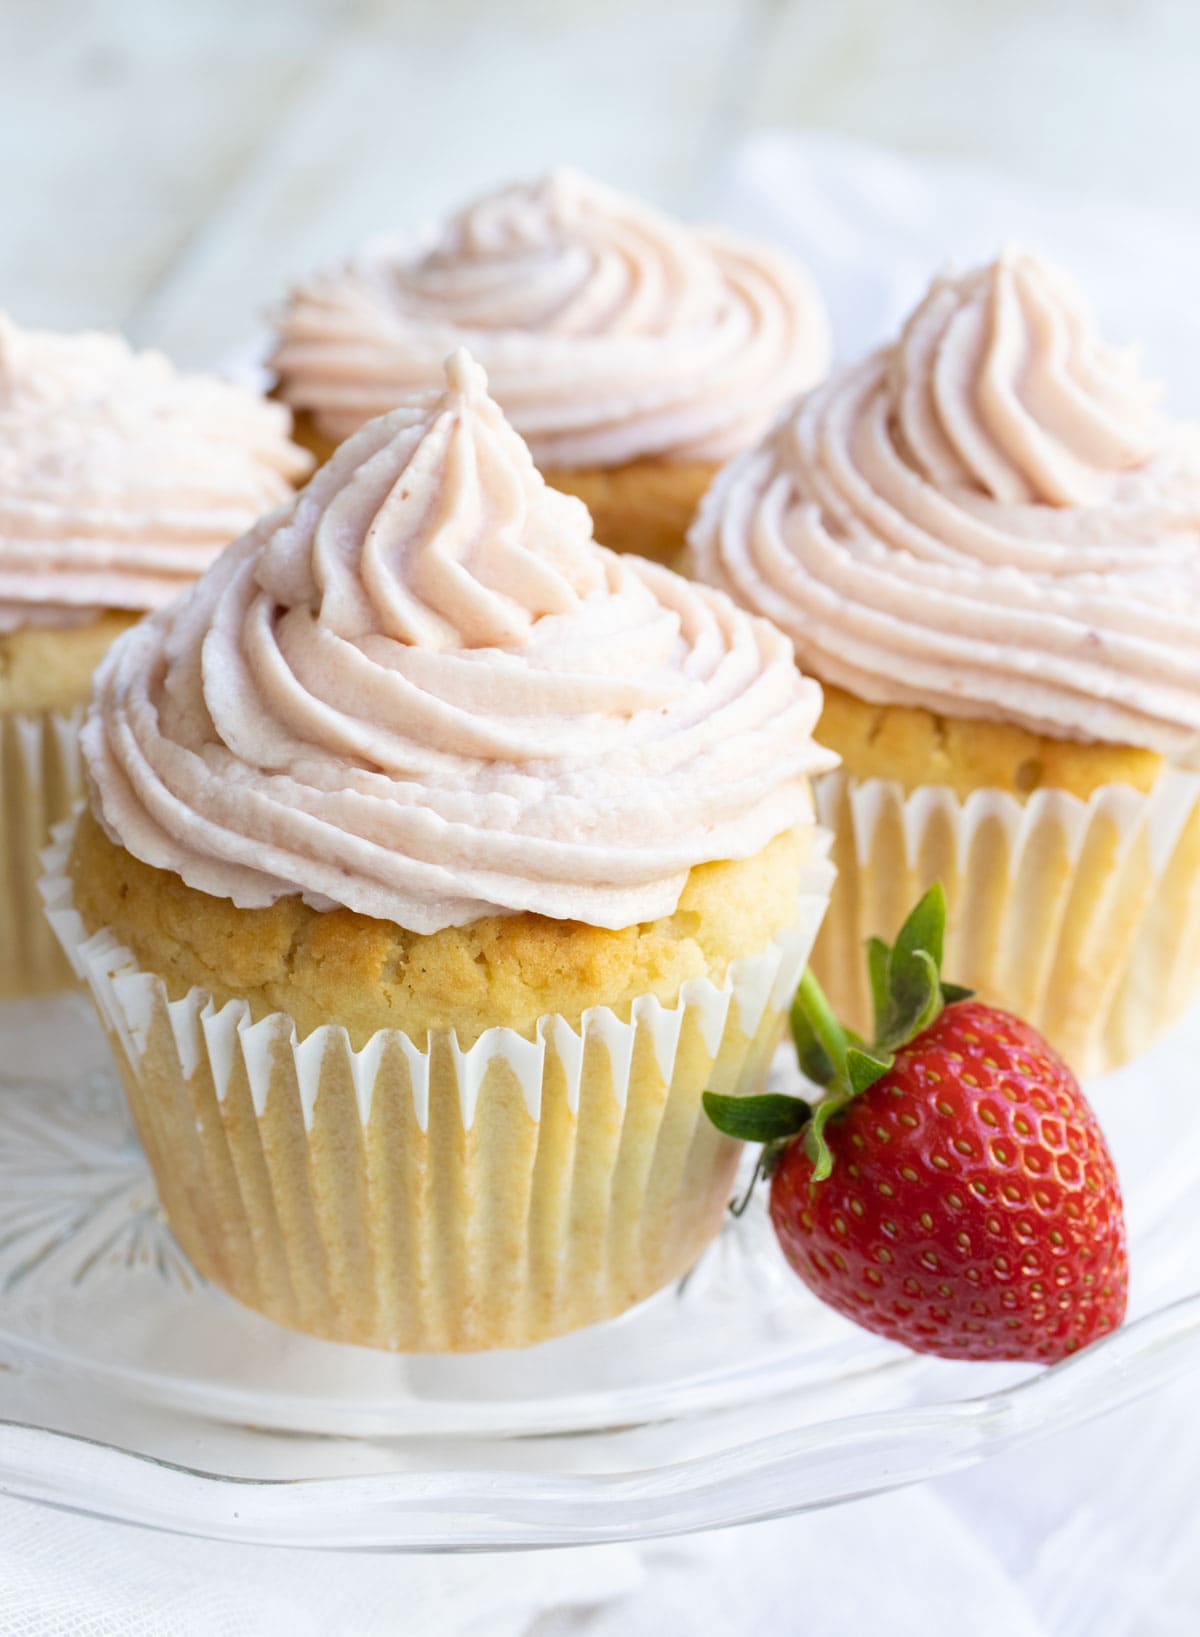 keto cupcakes with strawberry frosting and a strawberry on the side